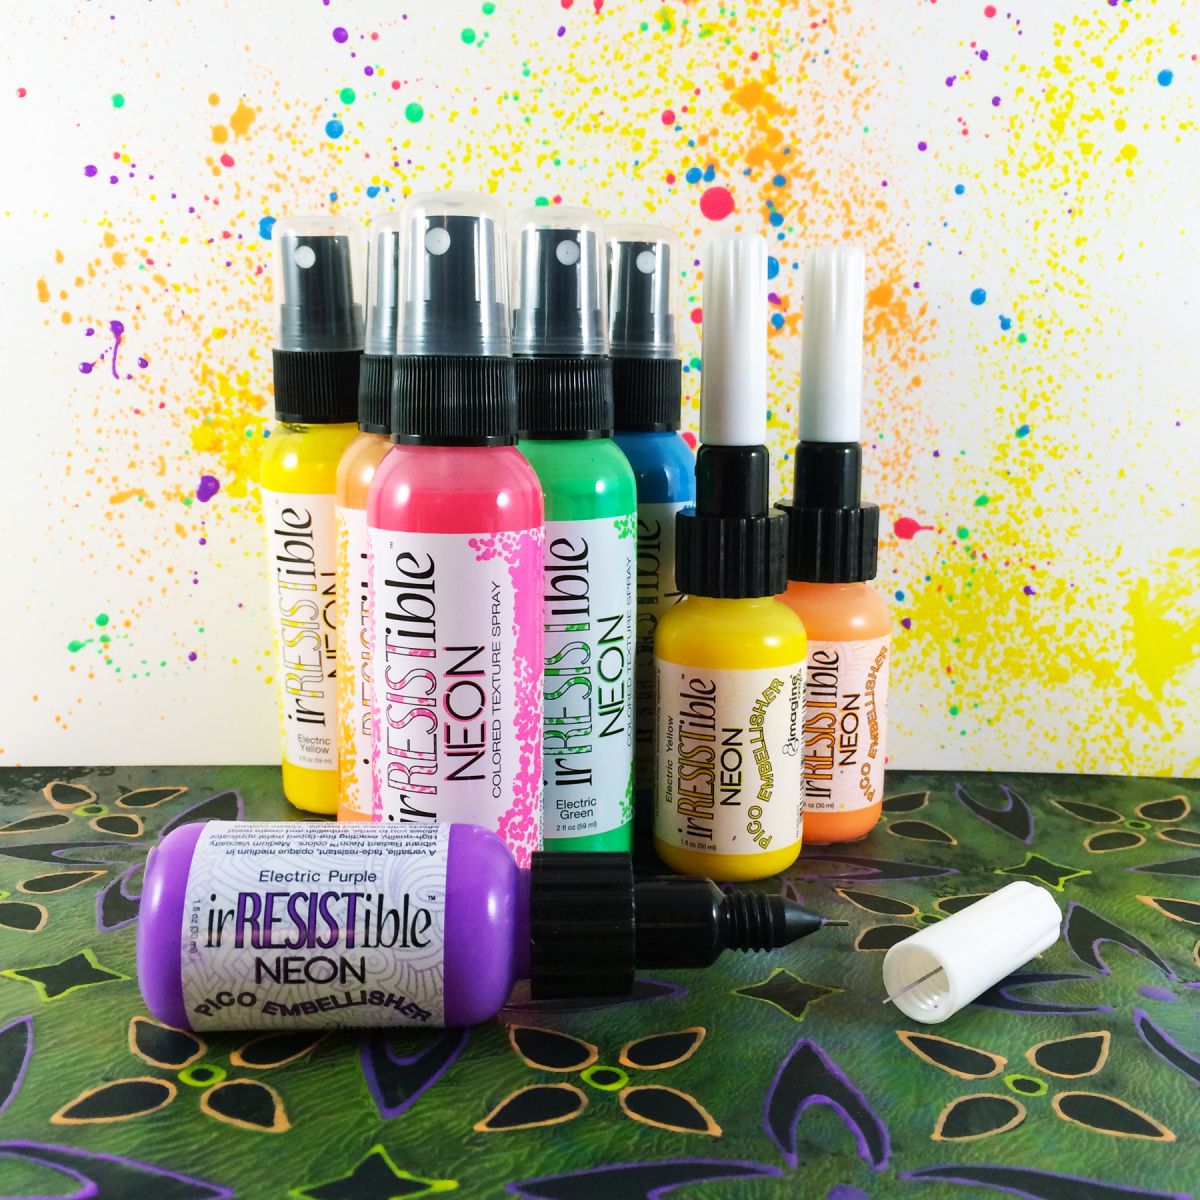 Multiple bottles of irRESISTible spray bottles and Pico Embellishers with a colorful background created using he product.